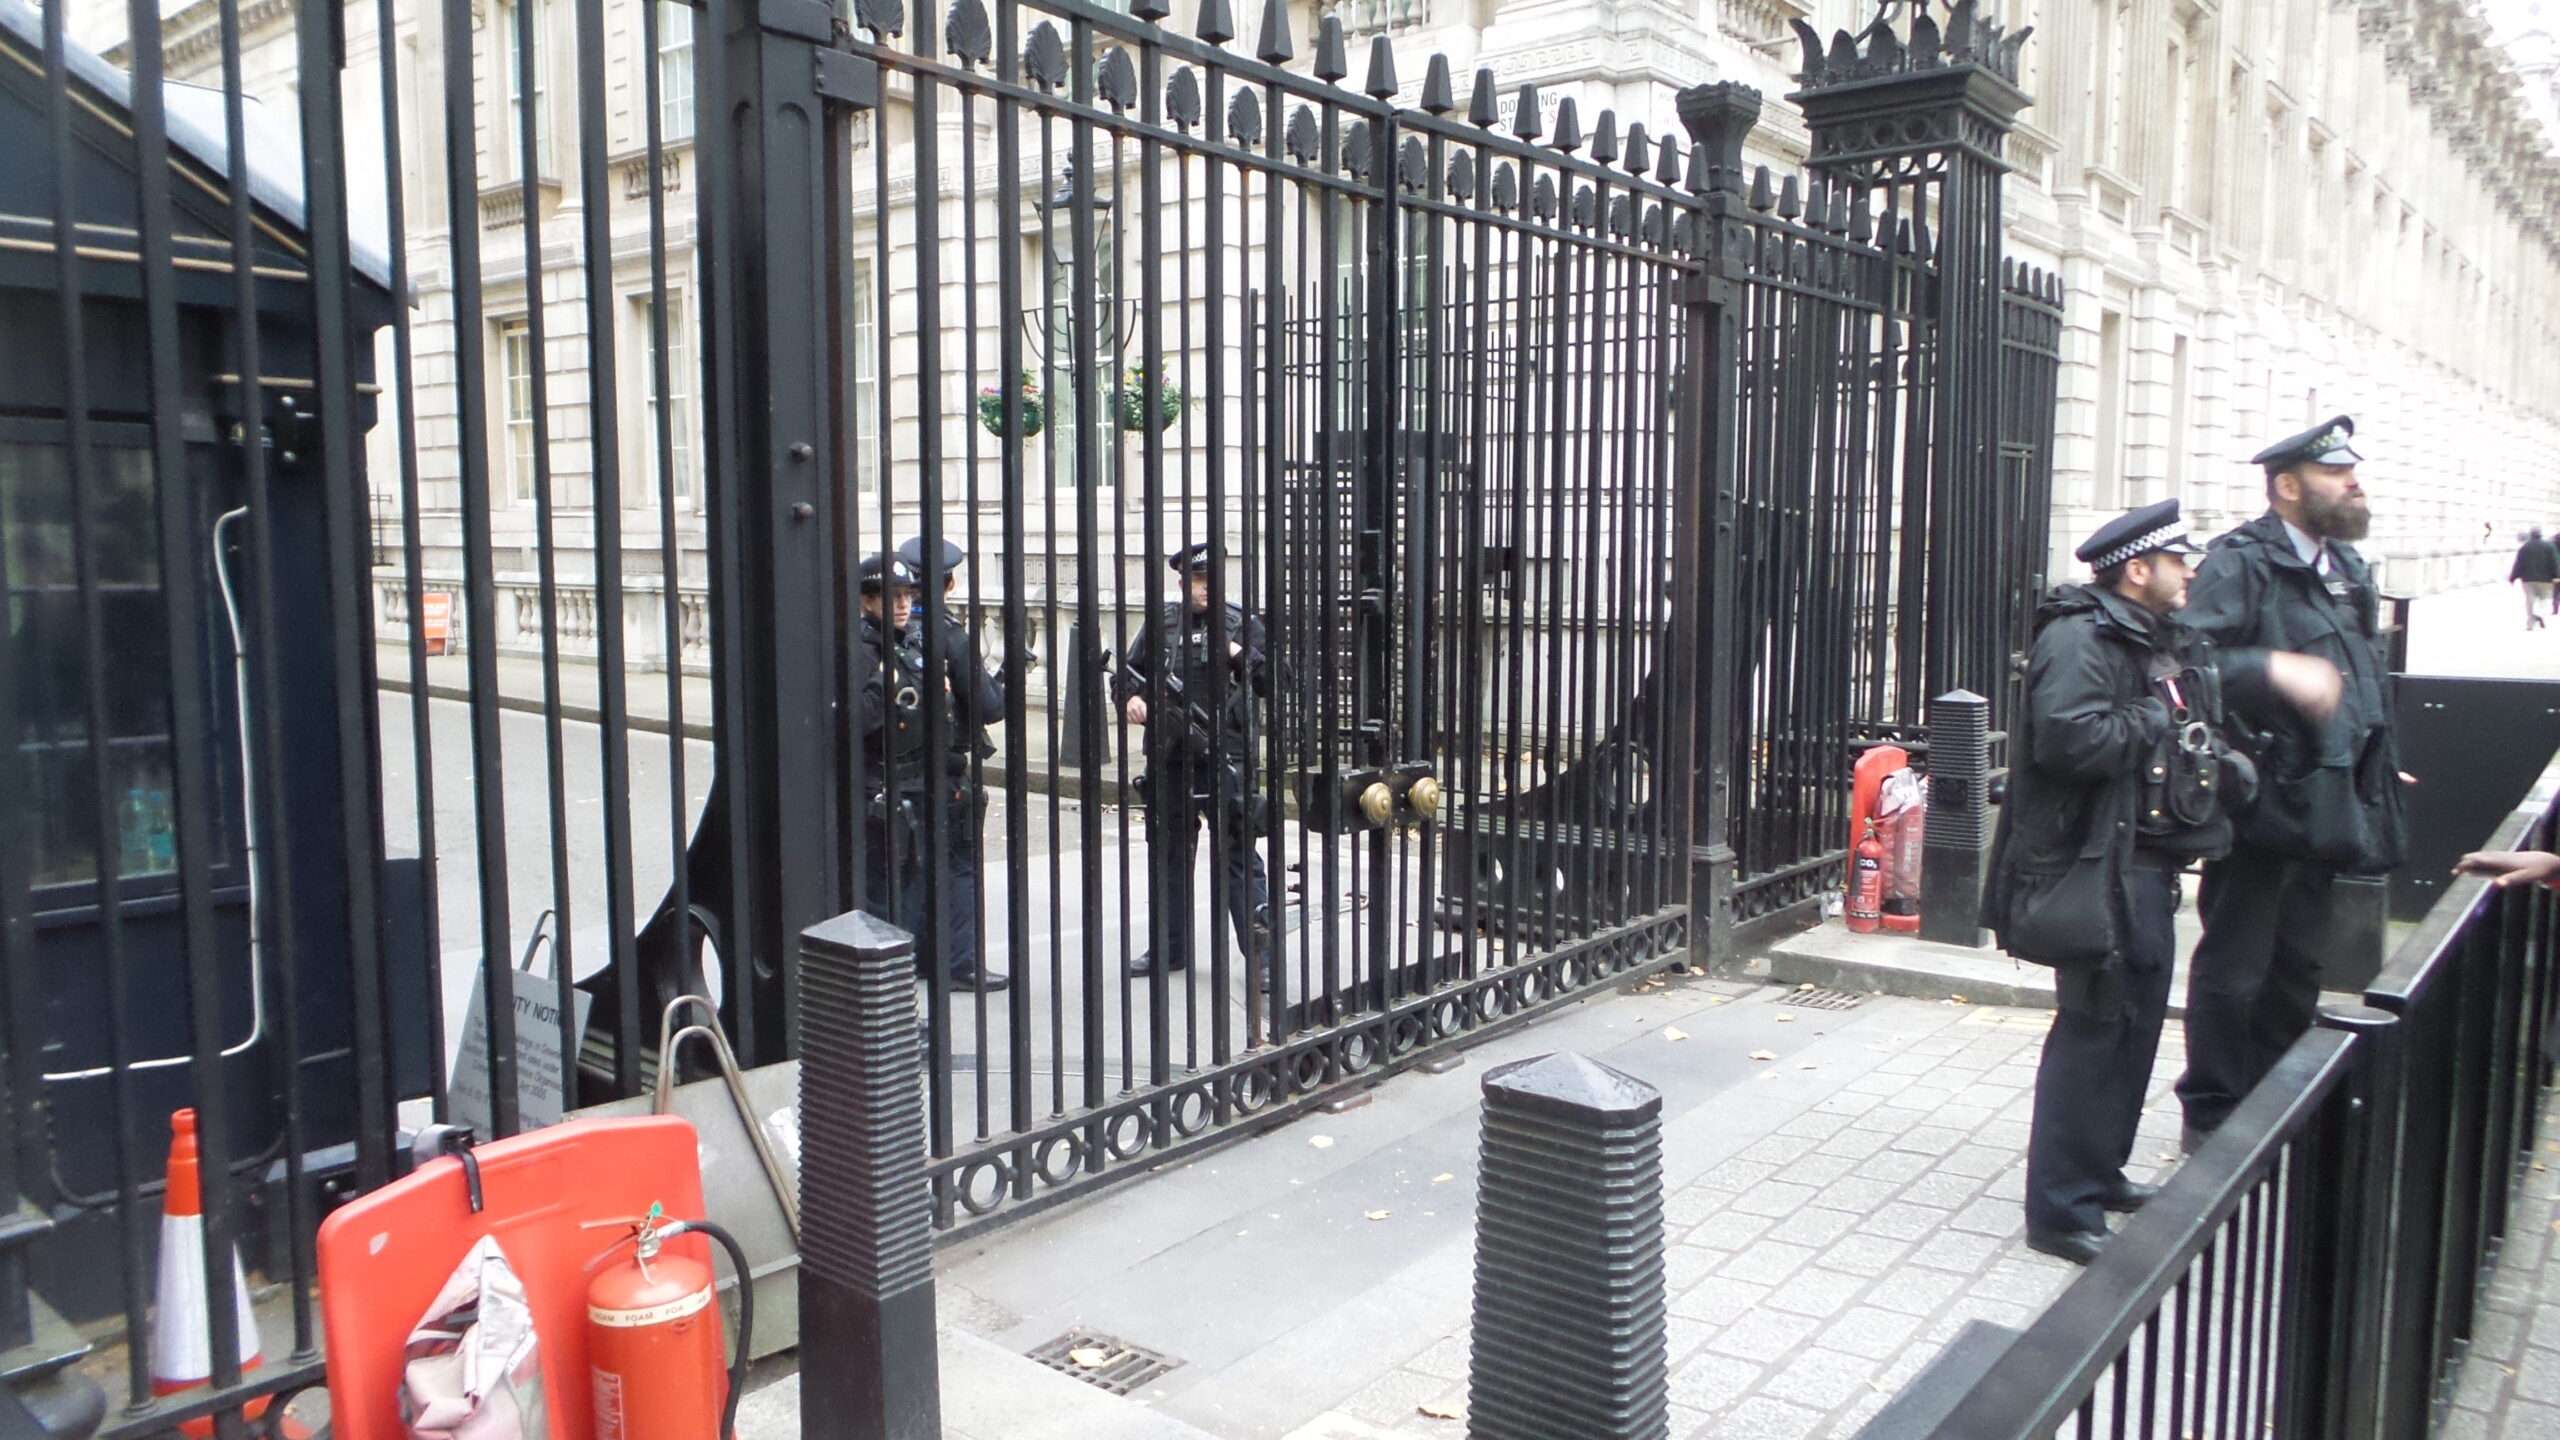 Outside 10 Downing Street.